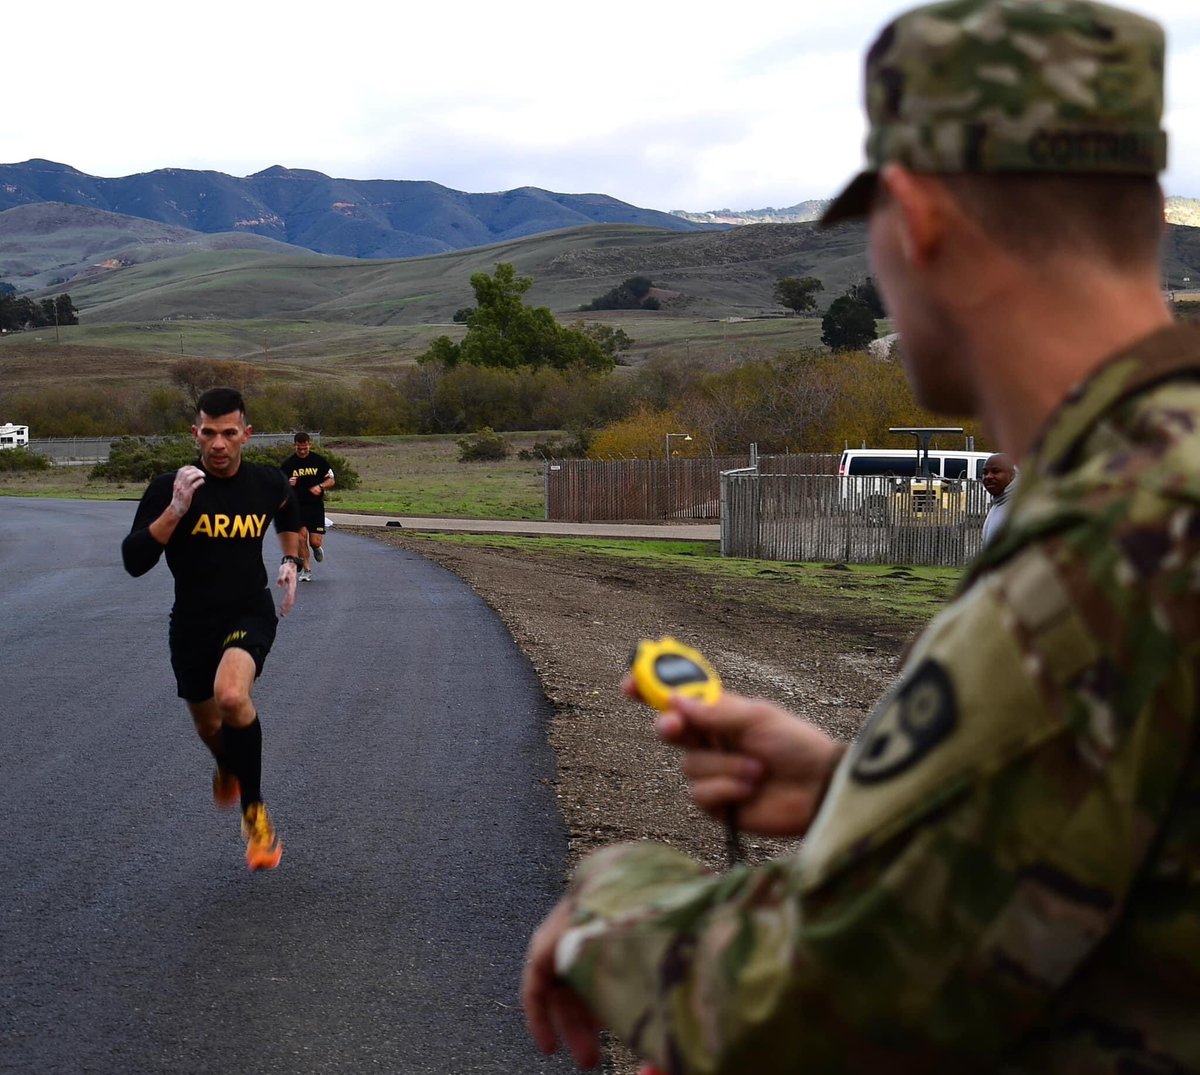 How are you preparing for the Army Combat Fitness Test (#ACFT)? Don’t just put it off until the last minute. Take a look at our fitness tips and get moving! rb.gy/6bunb